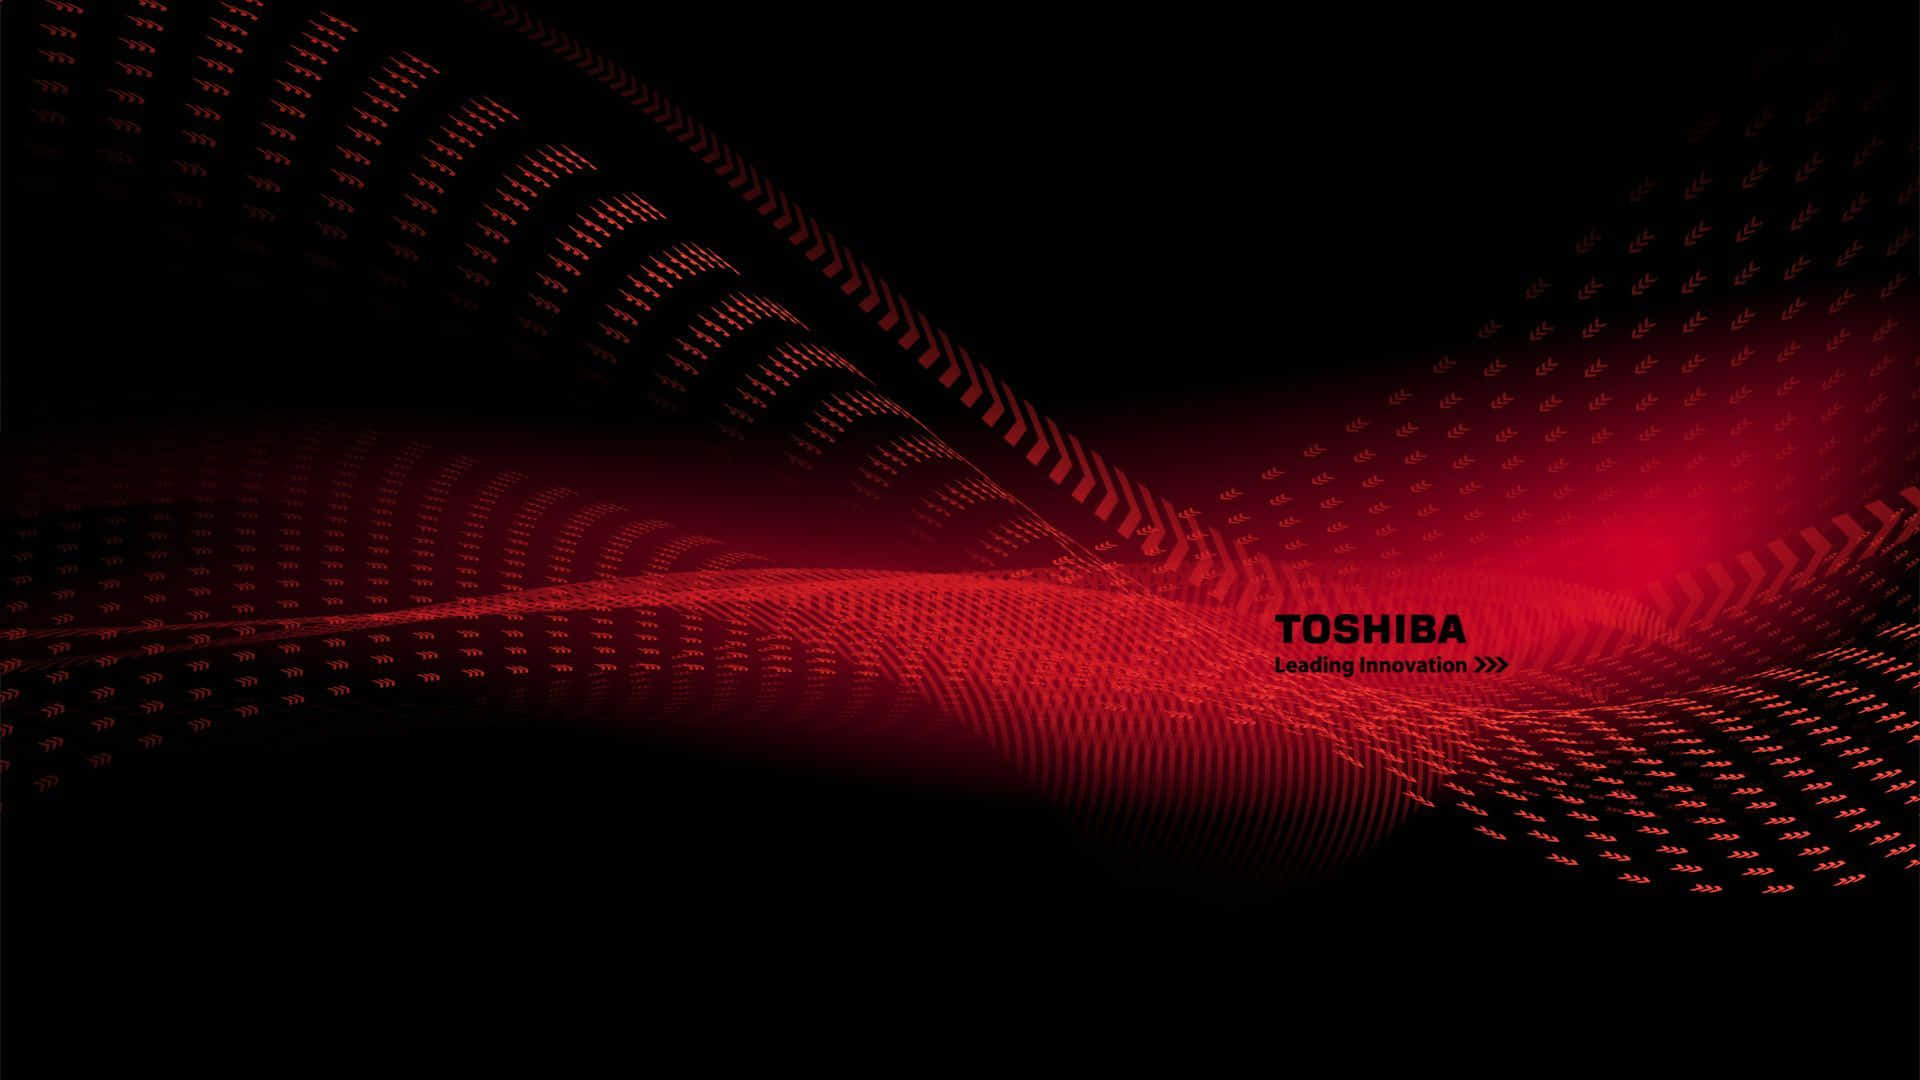 Experience the technology and innovation of Toshiba Wallpaper